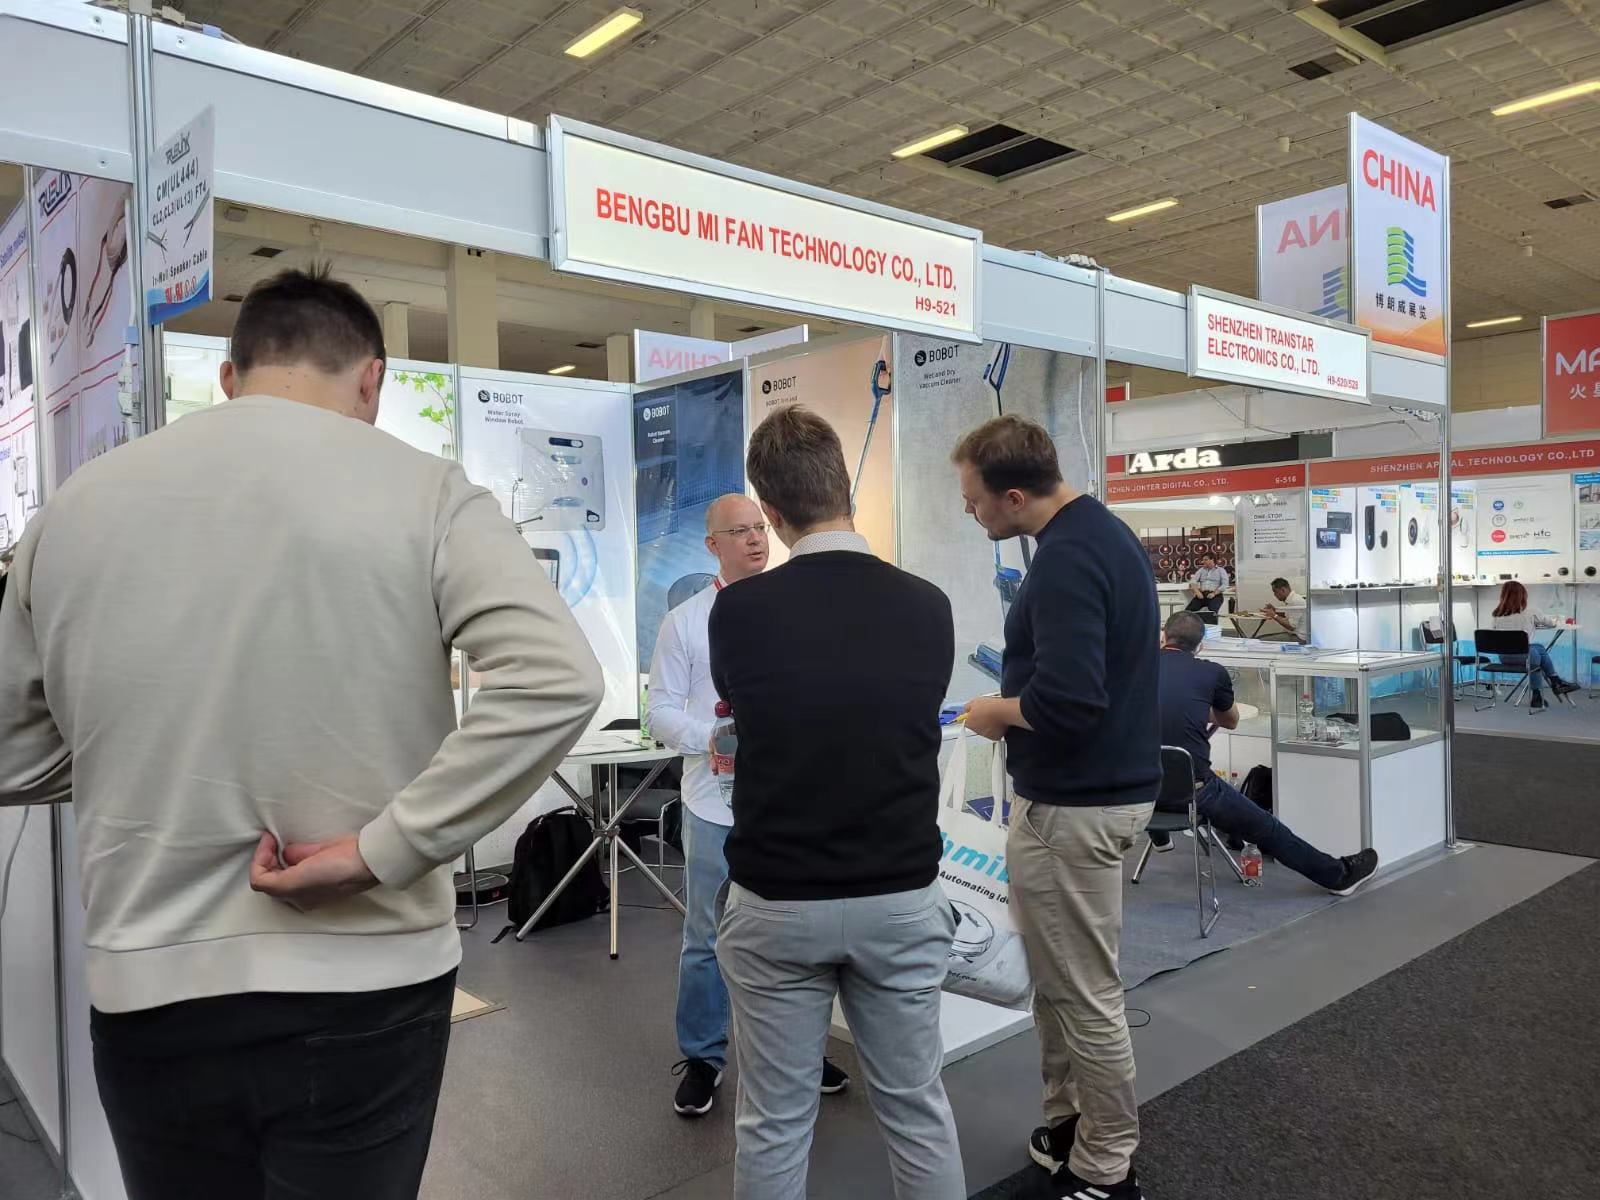 Bengbu MiFan Technology Co., Ltd Showcases Latest Wet and Dry Vacuum Cleaner Innovation at IFA - Consumer Electronics Unlimited Exhibition in Berlin, Germany. - Company News - 4